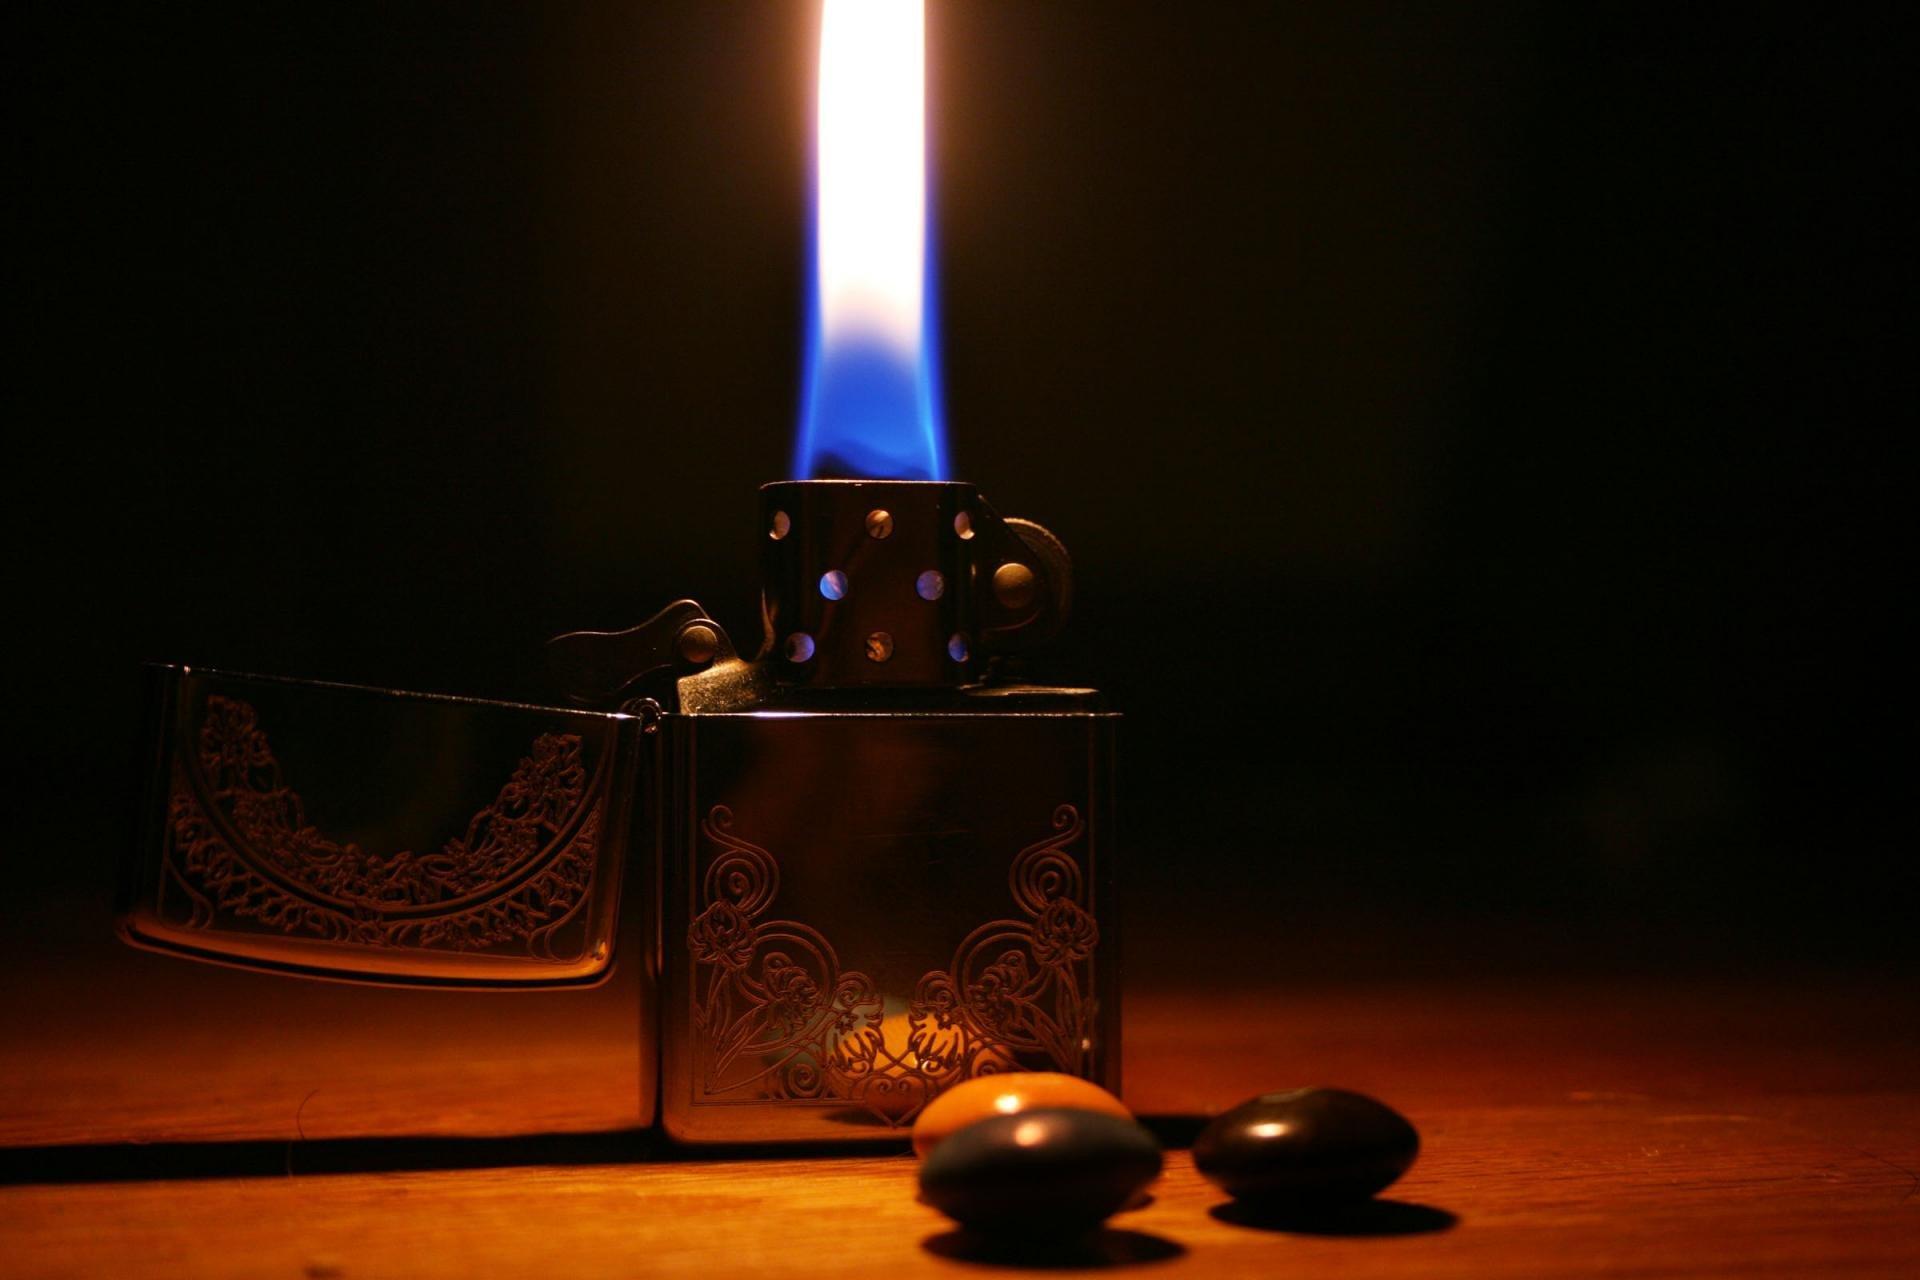 Lighter Photos Download The BEST Free Lighter Stock Photos  HD Images